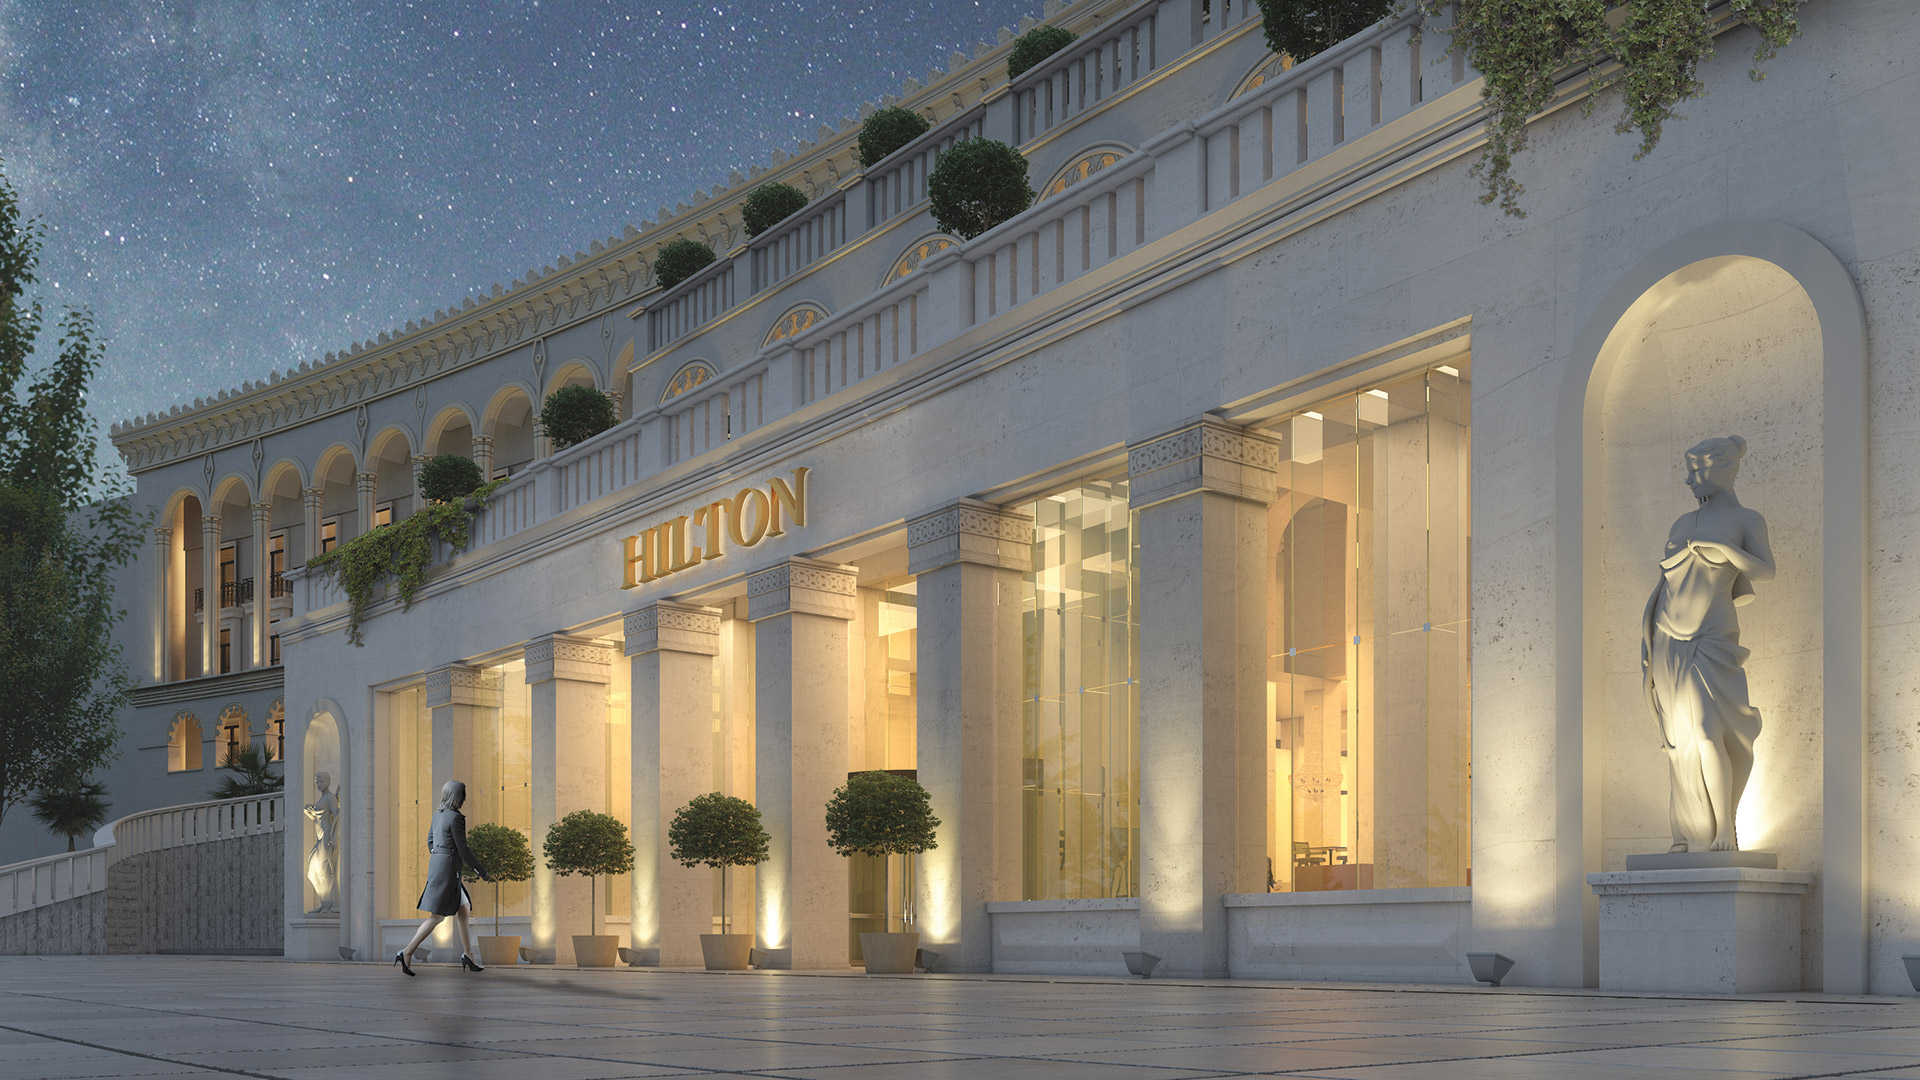 Planning works for Hotel Hilton are over